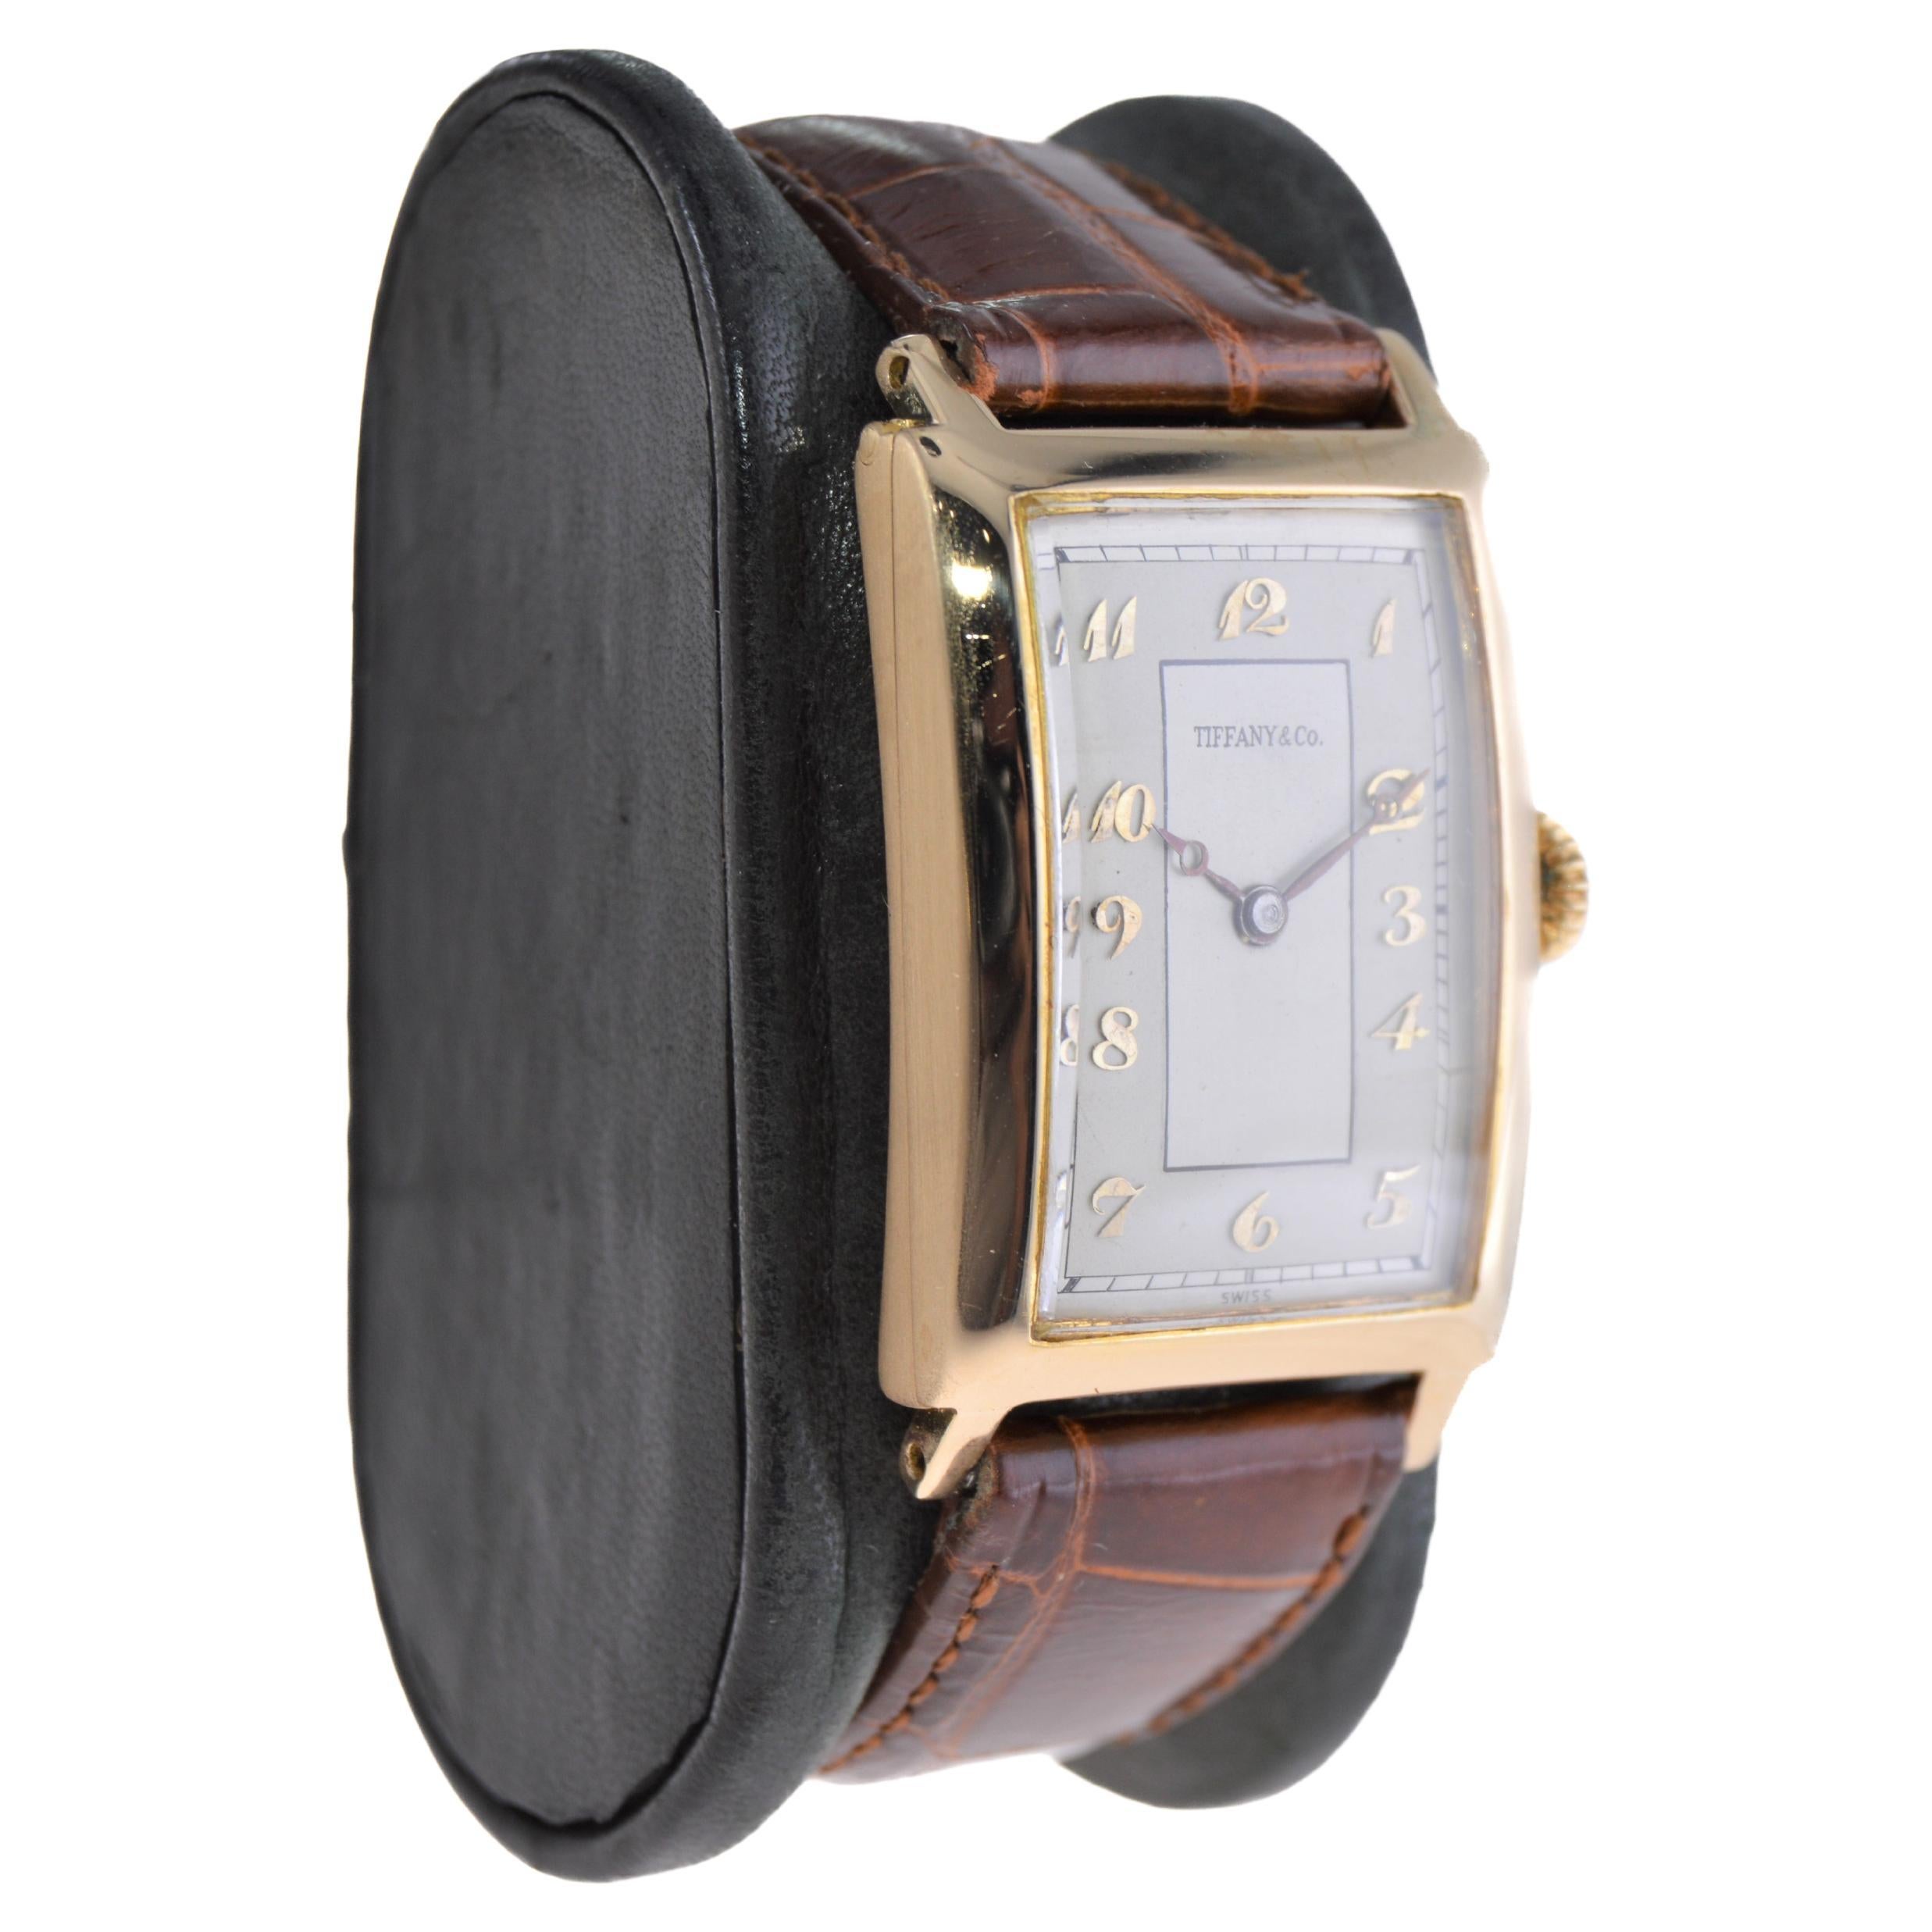 FACTORY / HOUSE: International Watch Company for Tiffany & Co.
STYLE / REFERENCE: Art Deco Tank / Hinged Case 
METAL / MATERIAL: 18Ktl. Yellow Gold
CIRCA / YEAR: 1930's
DIMENSIONS / SIZE: Length 43mm x Width 25mm
MOVEMENT / CALIBER: Manual Winding /